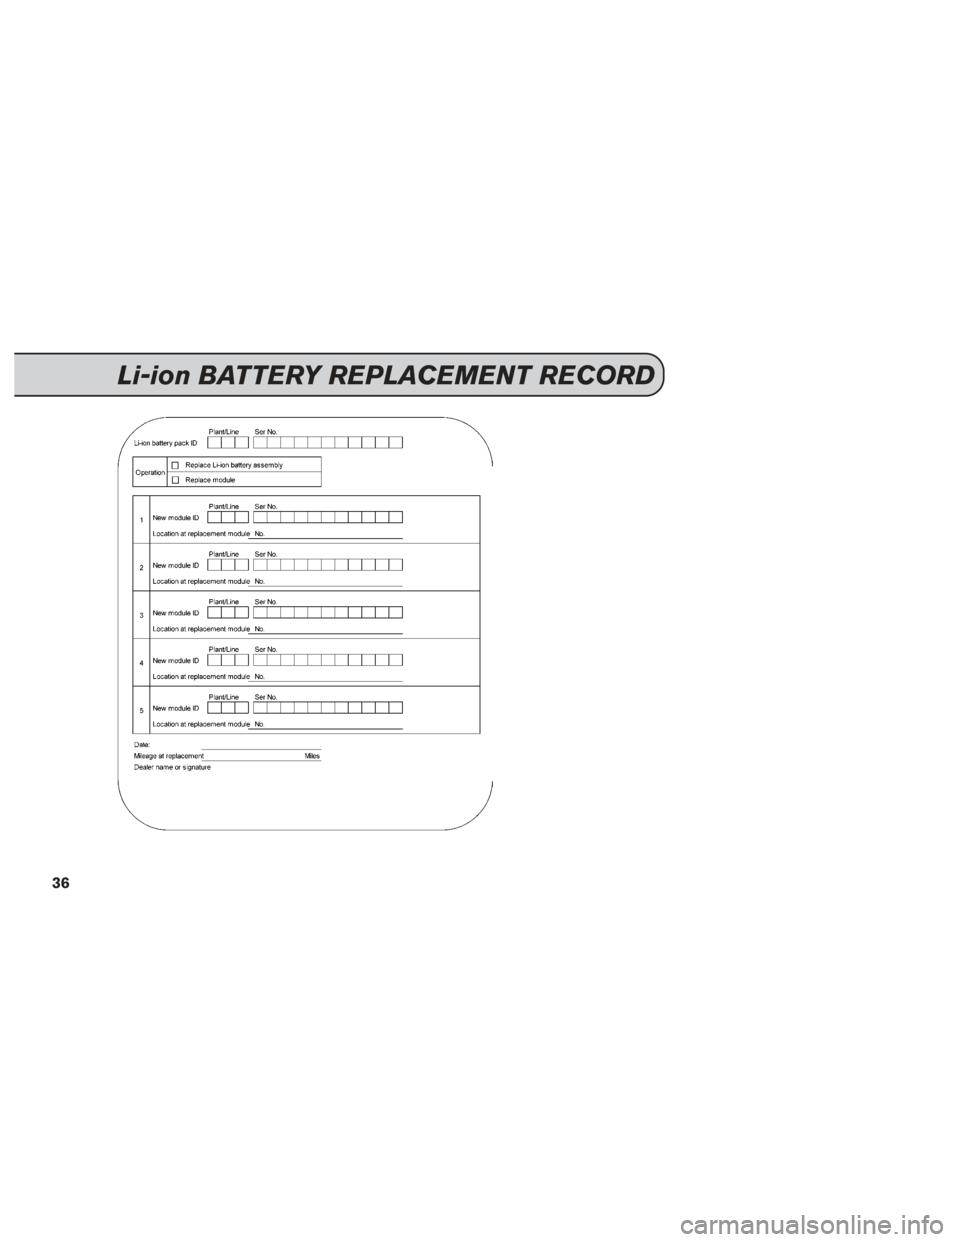 NISSAN LEAF 2015 1.G Service And Maintenance Guide Li-ion BATTERY REPLACEMENT RECORD
36 